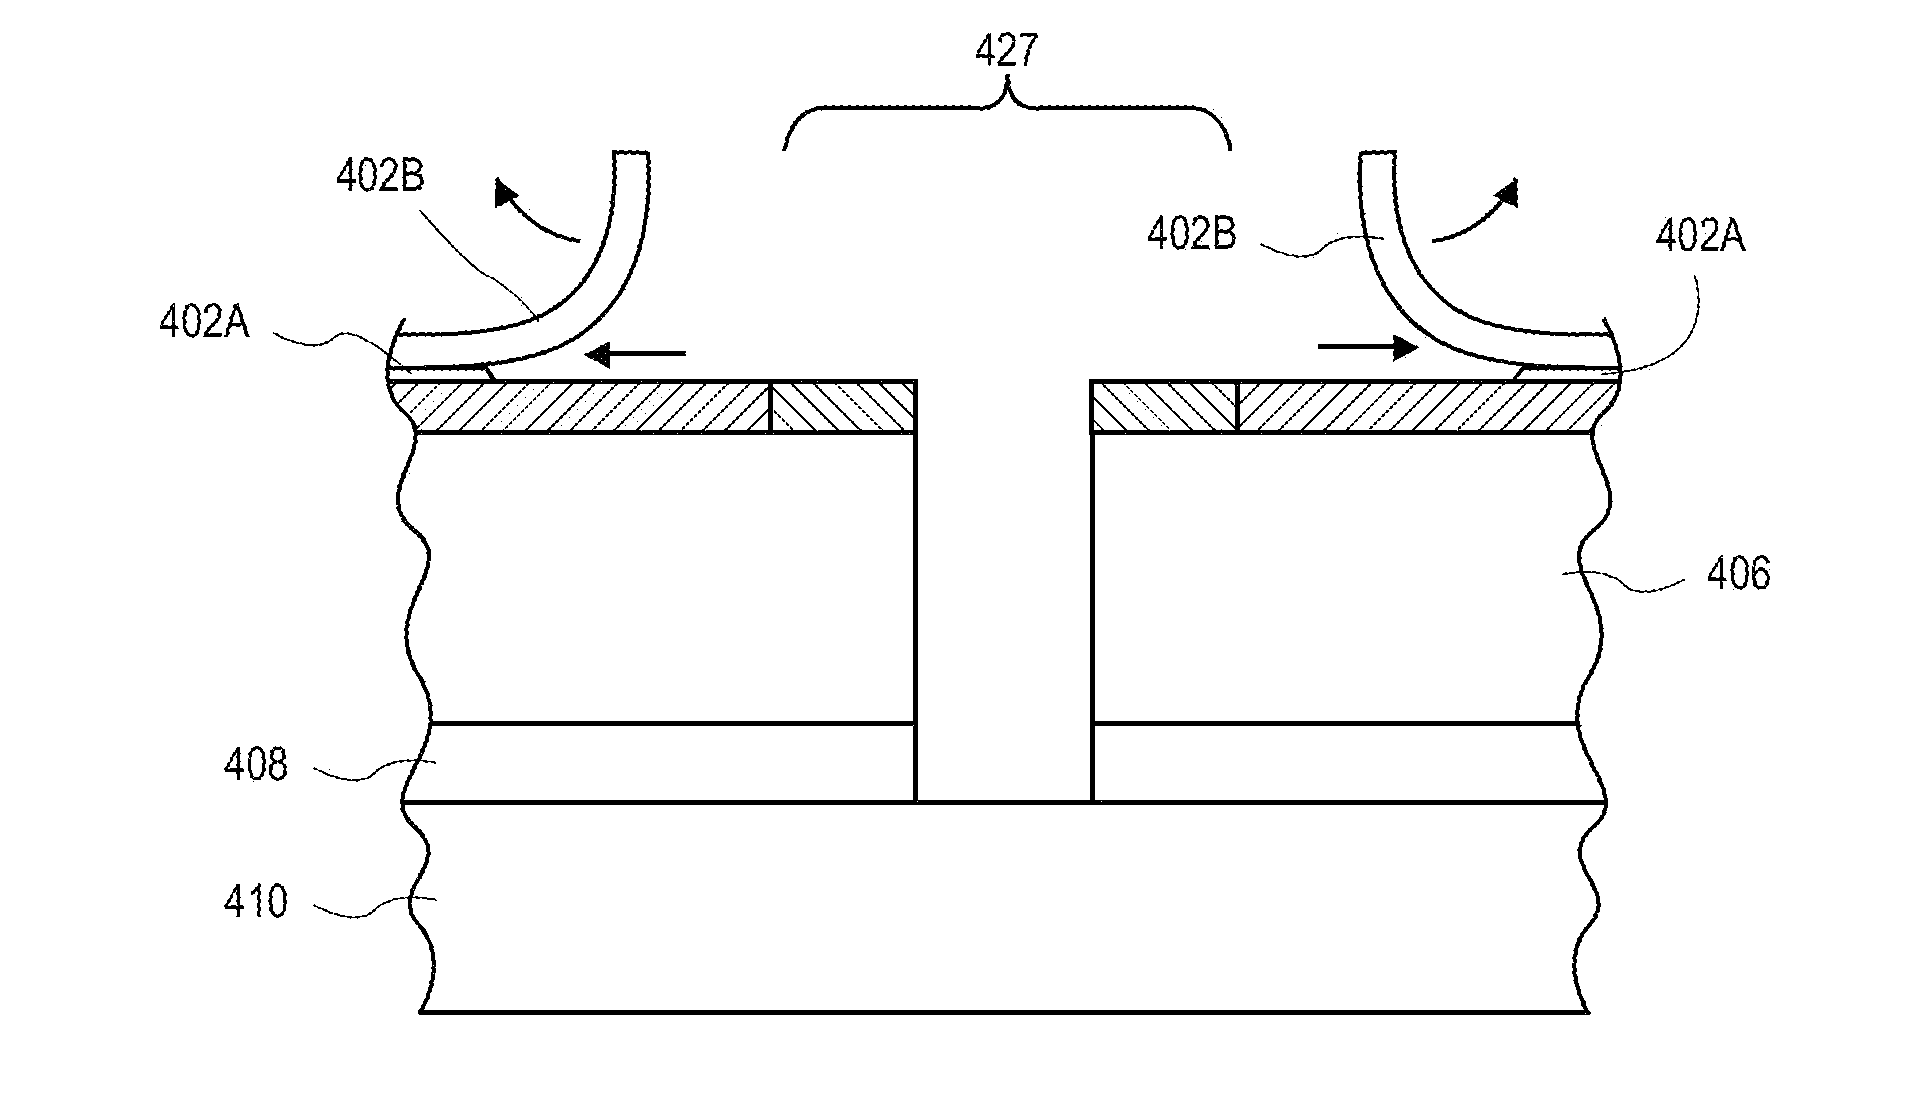 Multi-layer mask for substrate dicing by laser and plasma etch